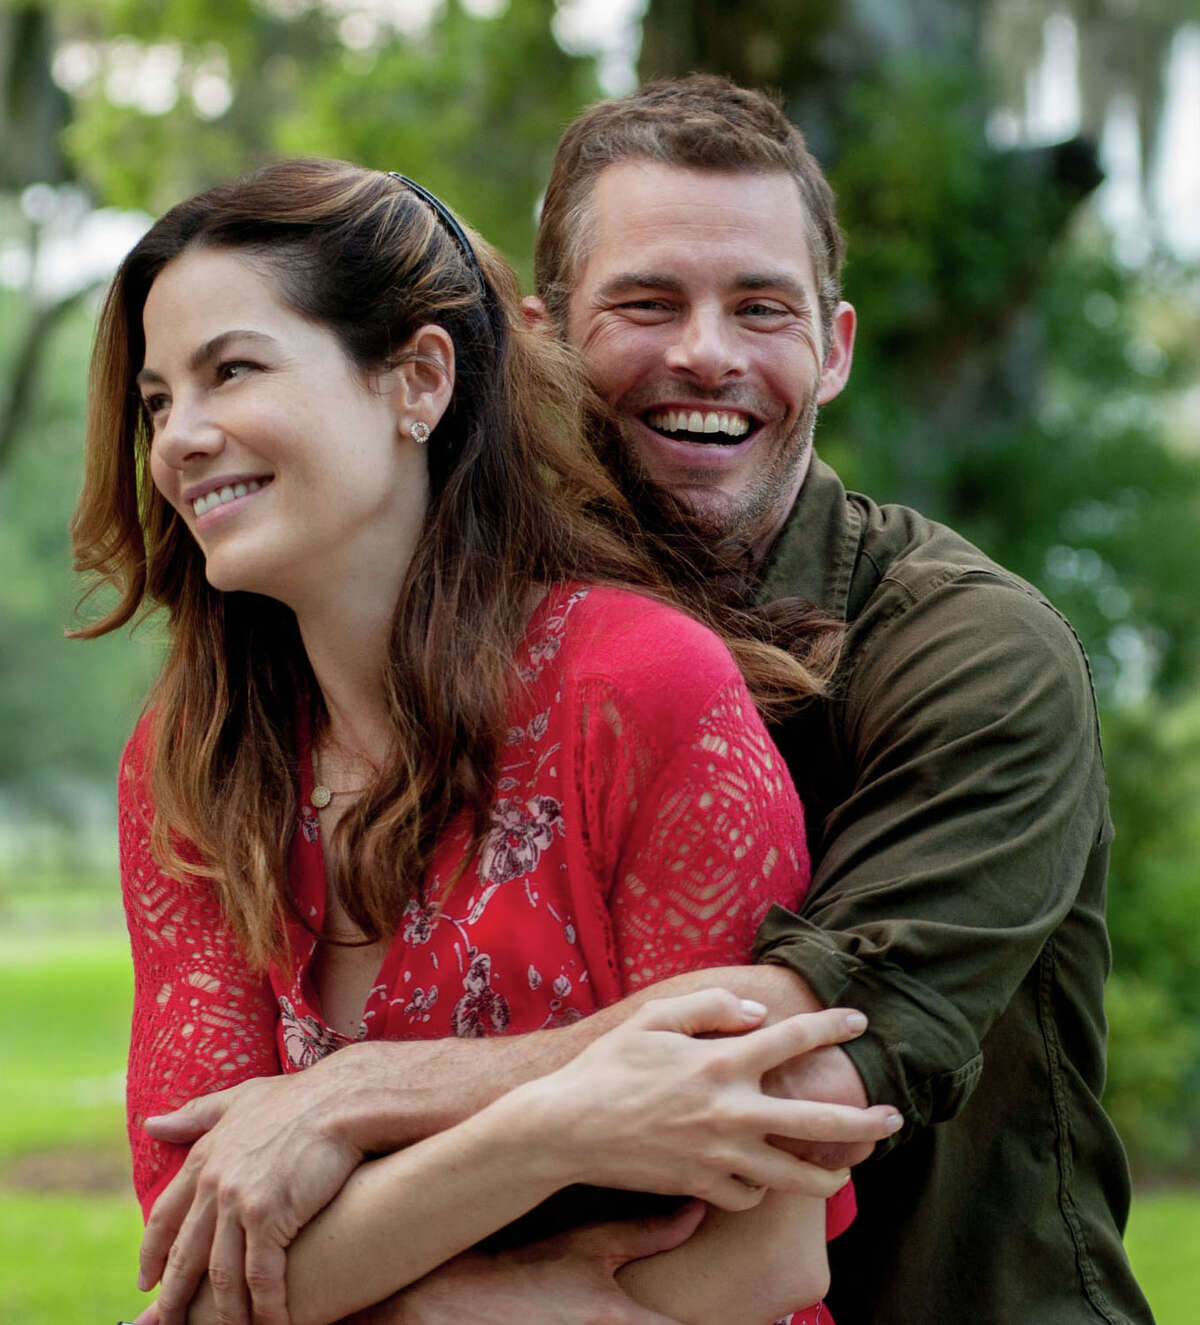 Michelle Monaghan and James Marsden star in "The Best of Me."﻿